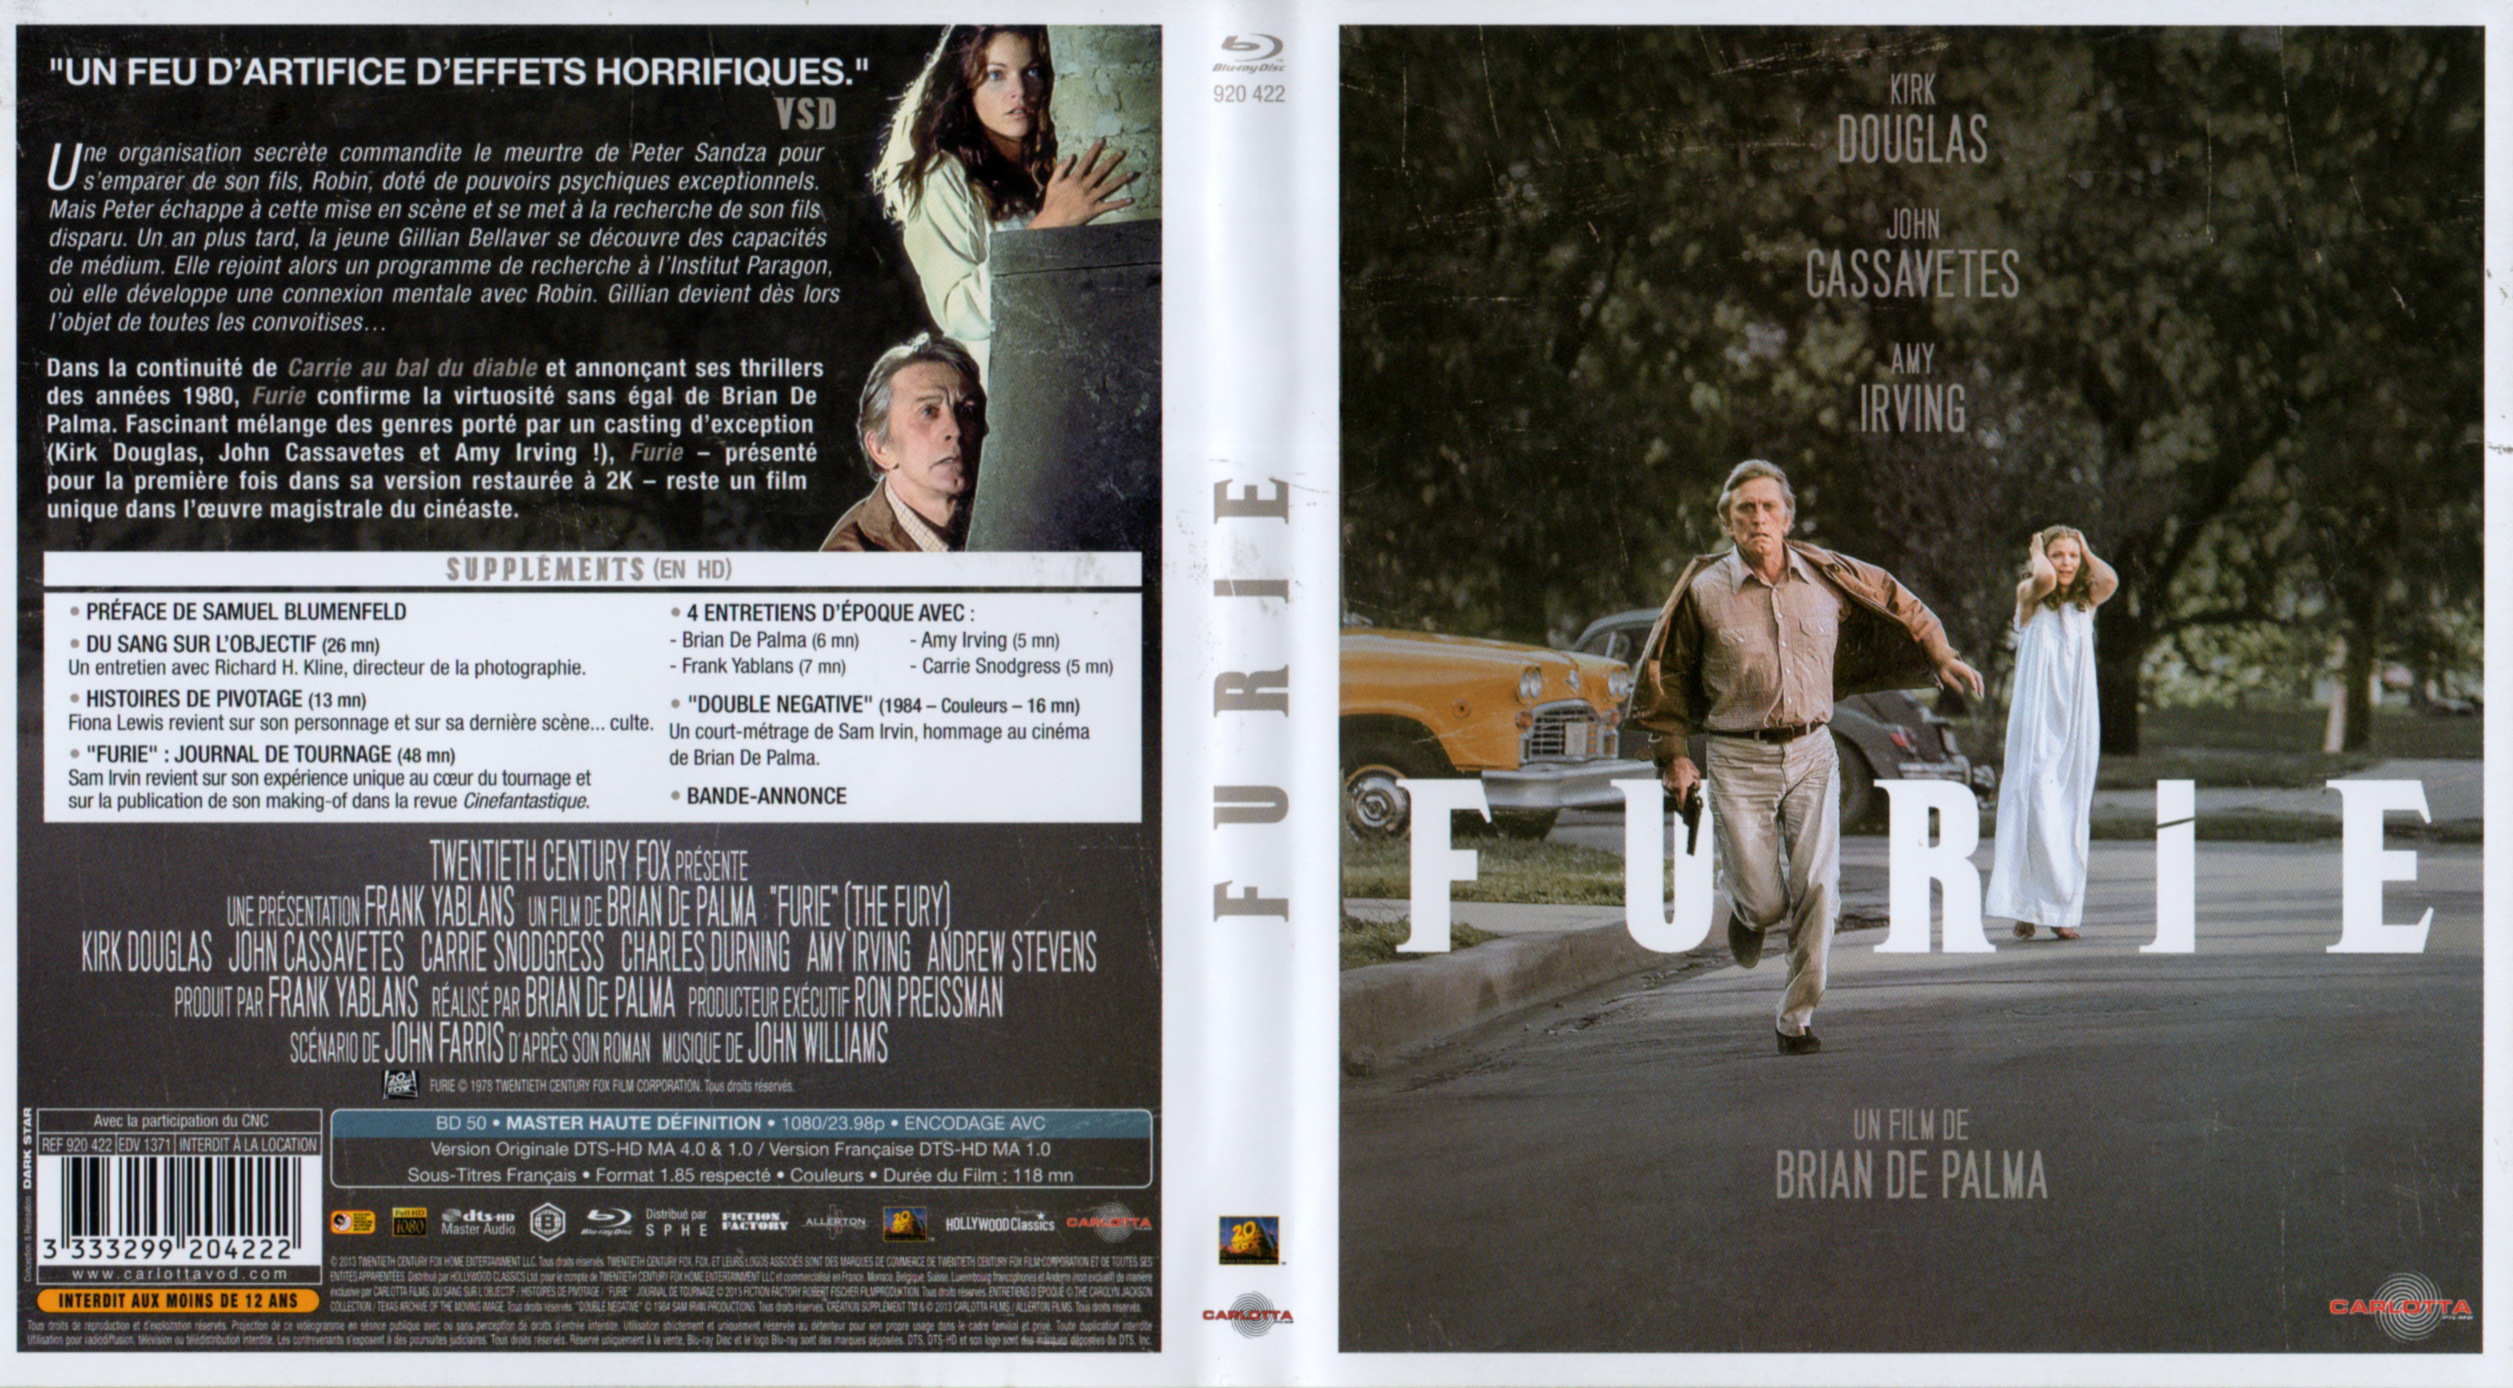 Jaquette DVD Furie (BLU-RAY)